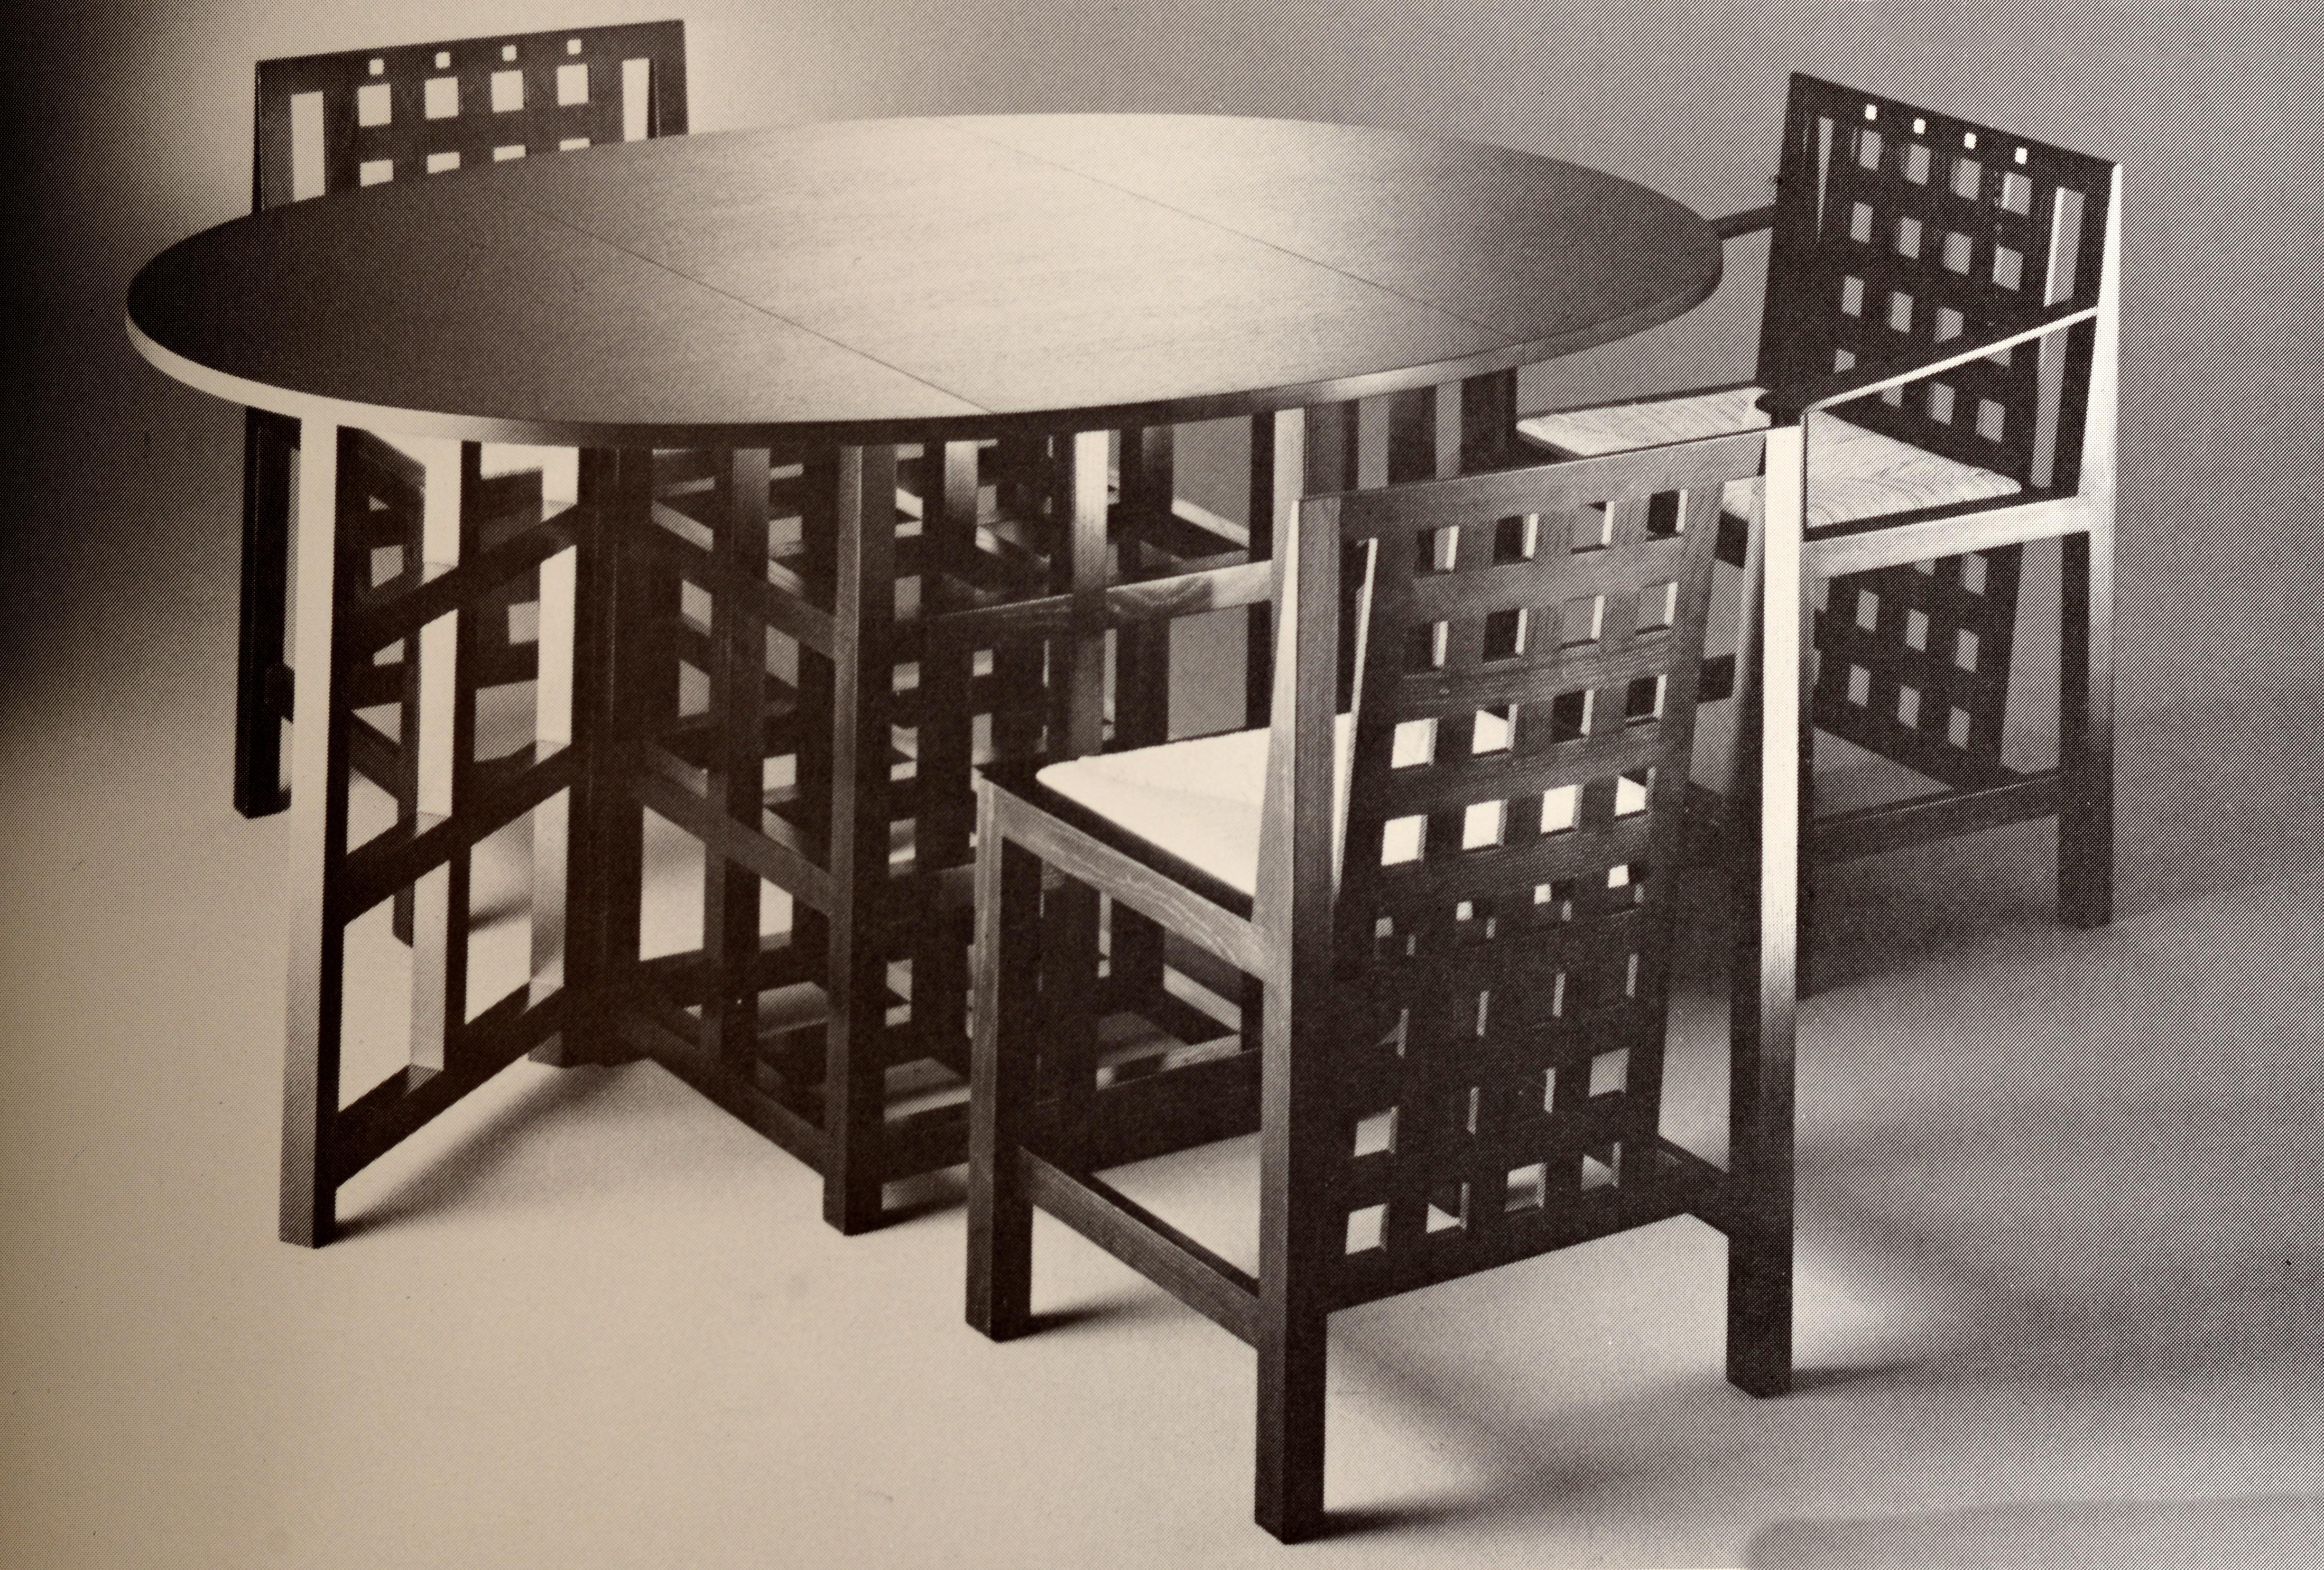 Furniture Designed by Architects by Marian Page, First Printing Paperback For Sale 9